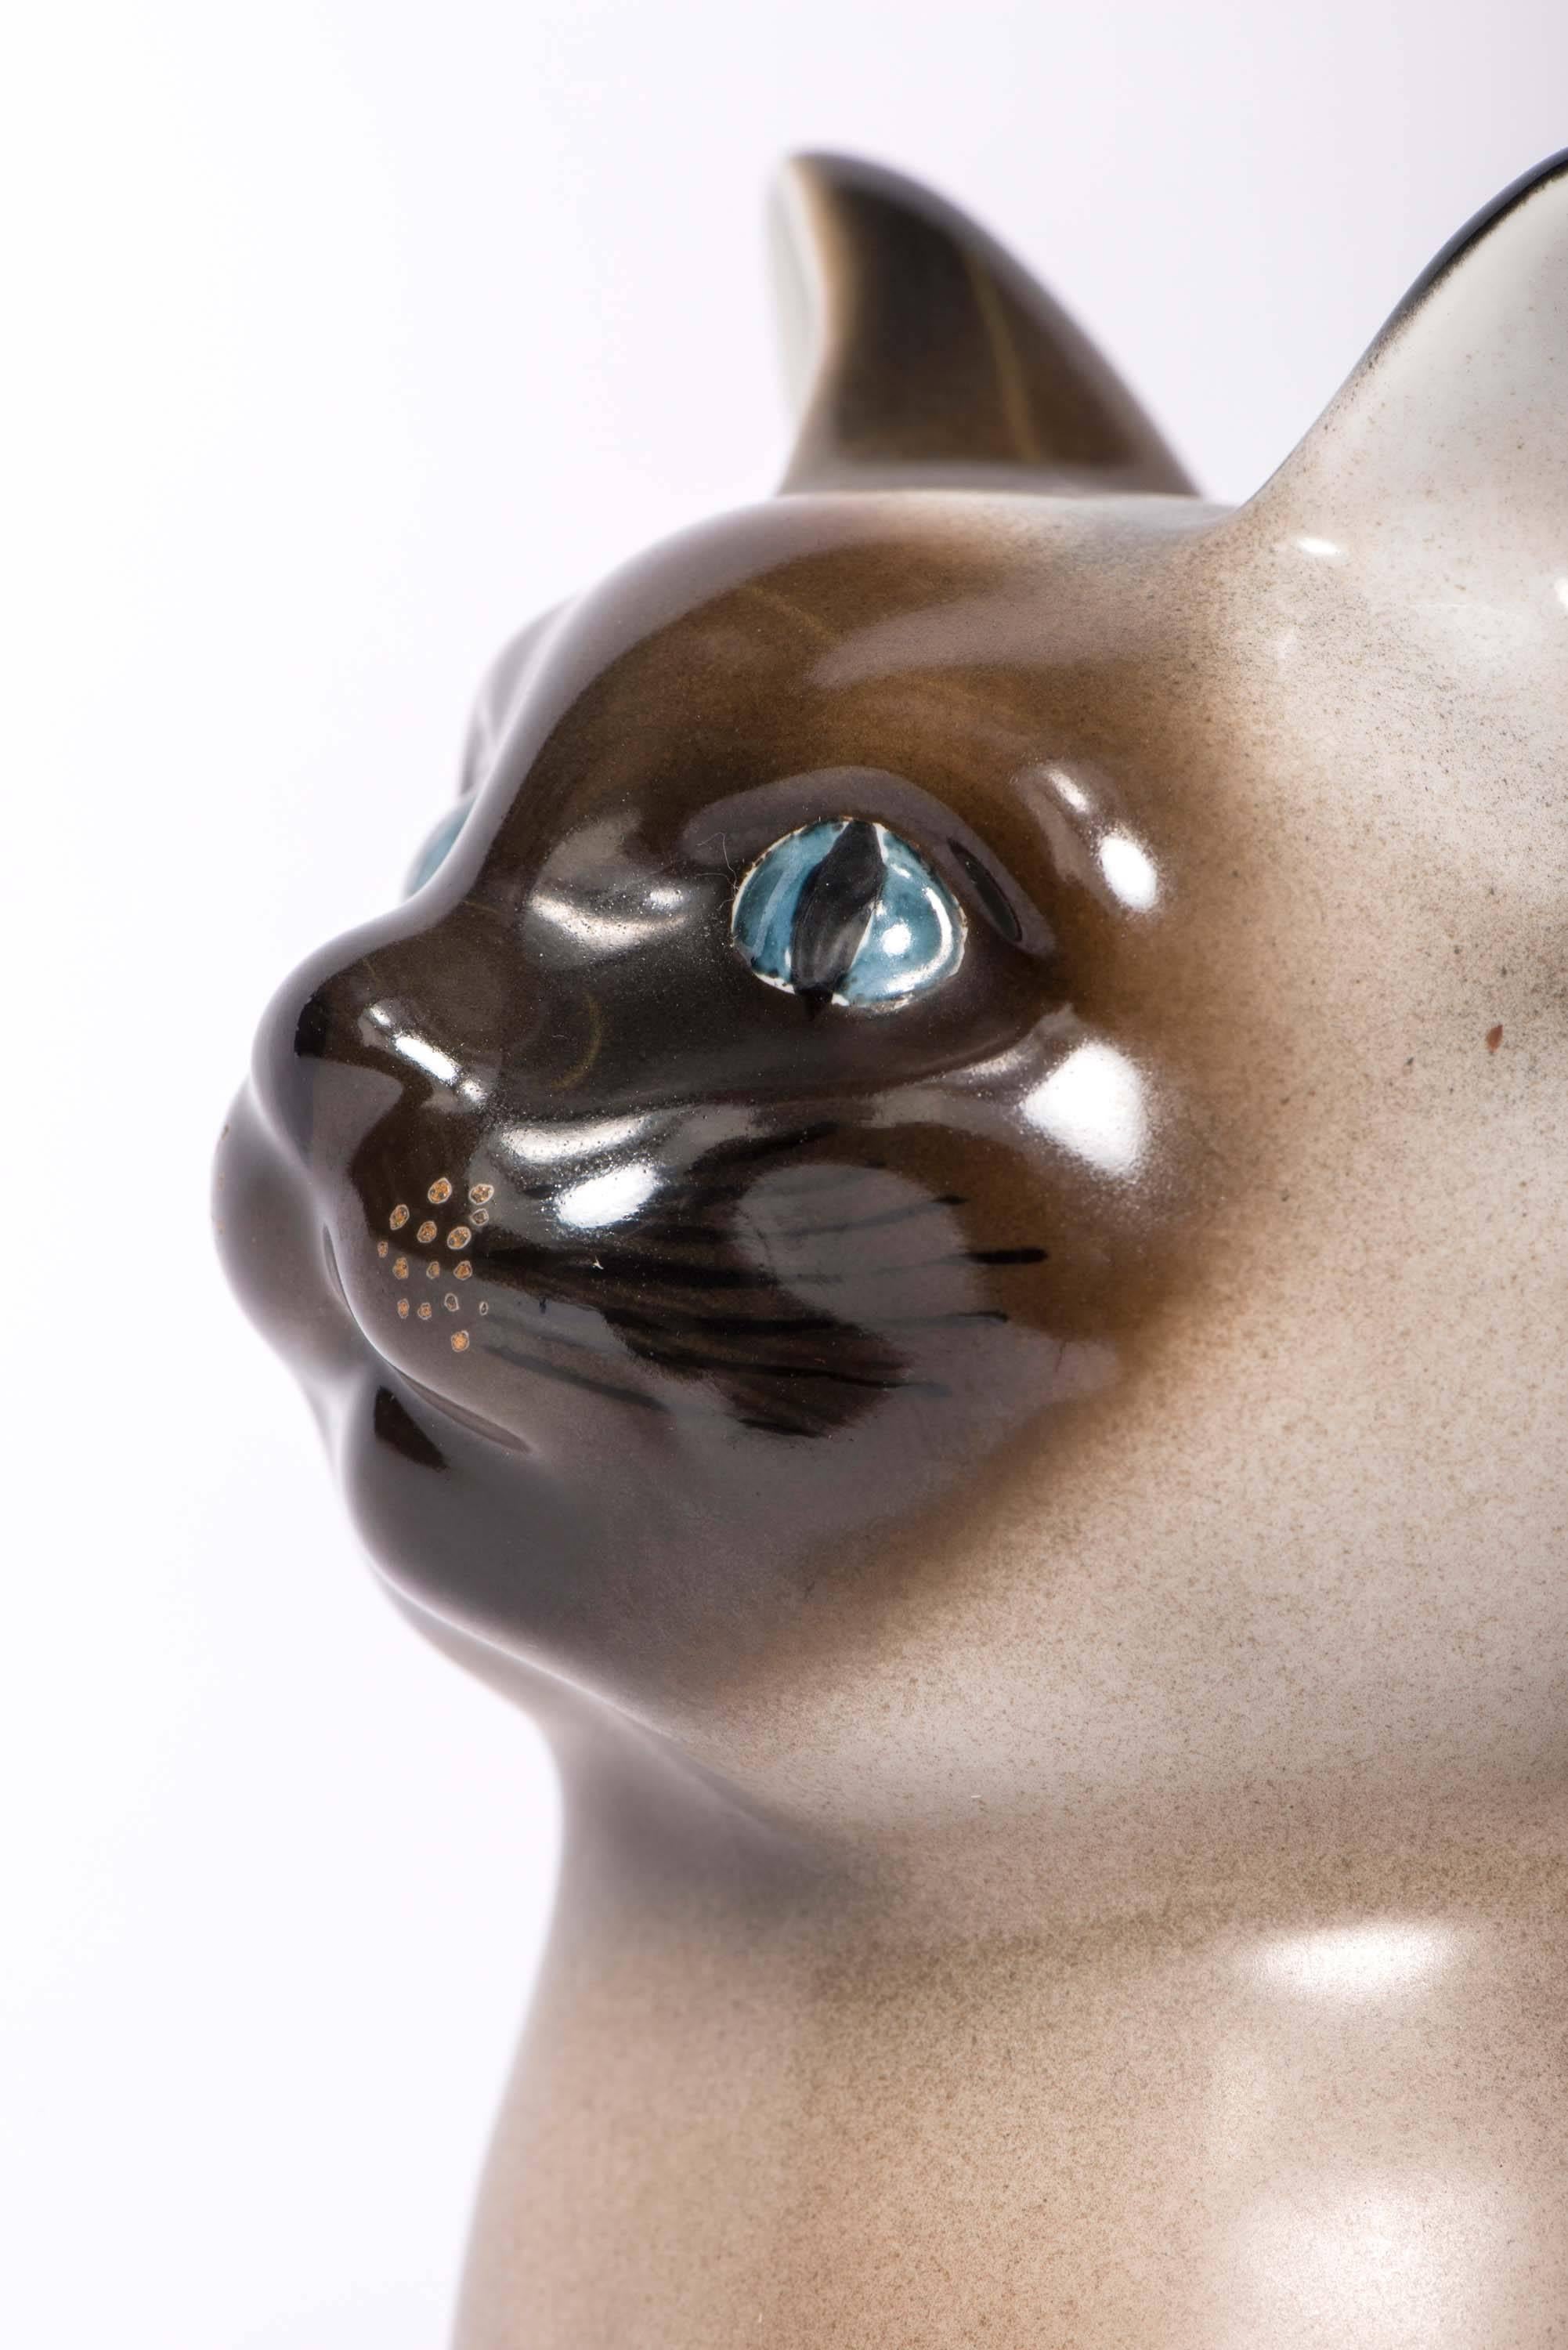 Italian Porcelain Model of a Seated Siamese Cat by Piero Fornasetti